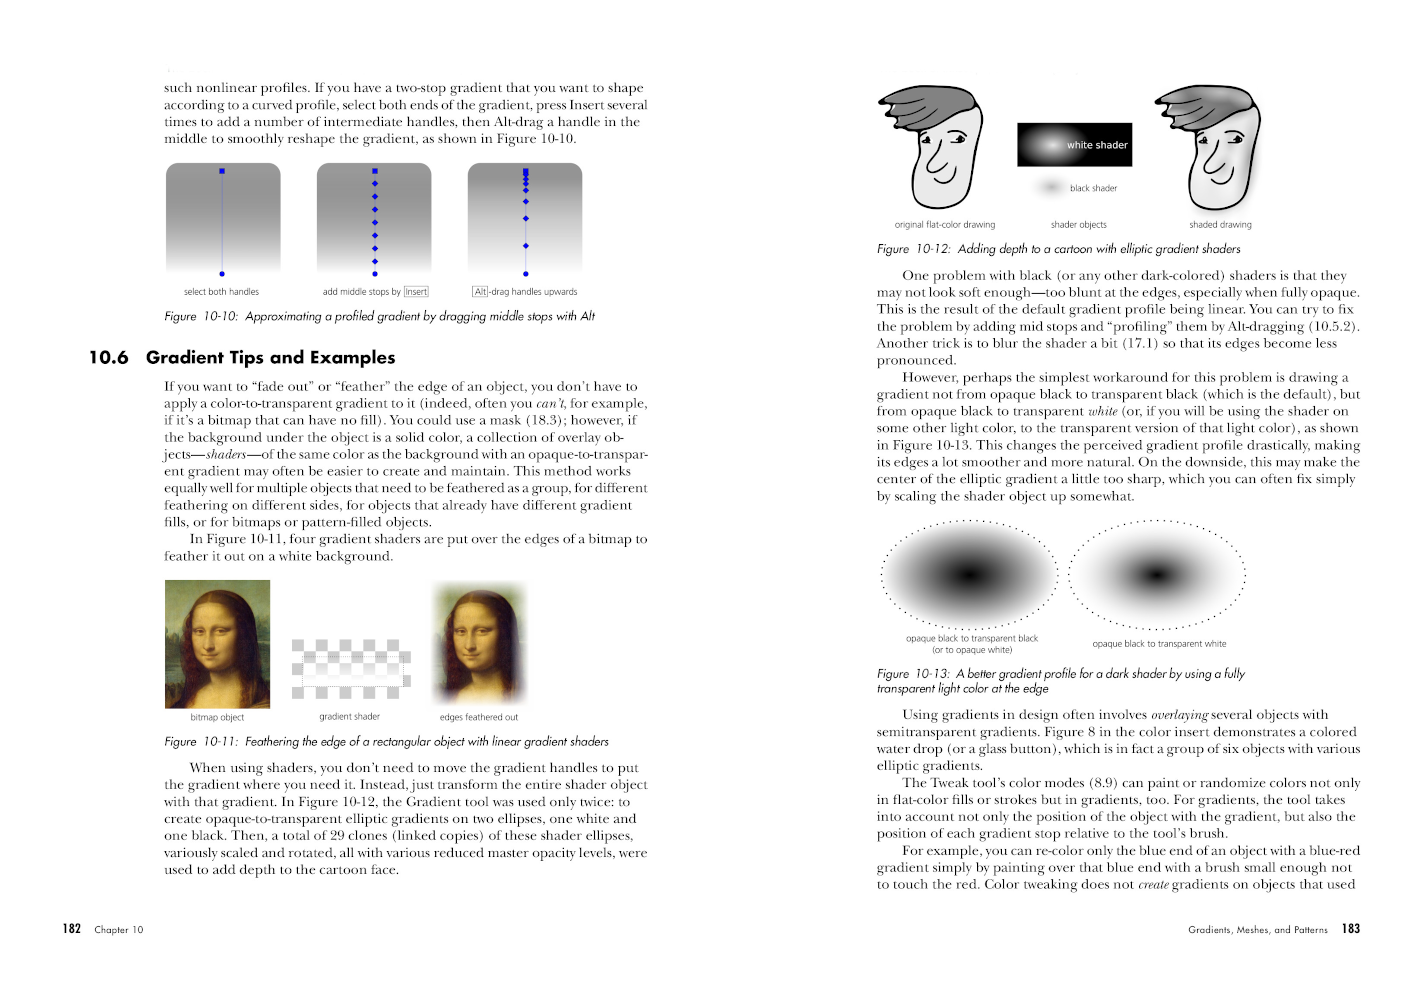 The Book of Inkscape 2e Page 182-183